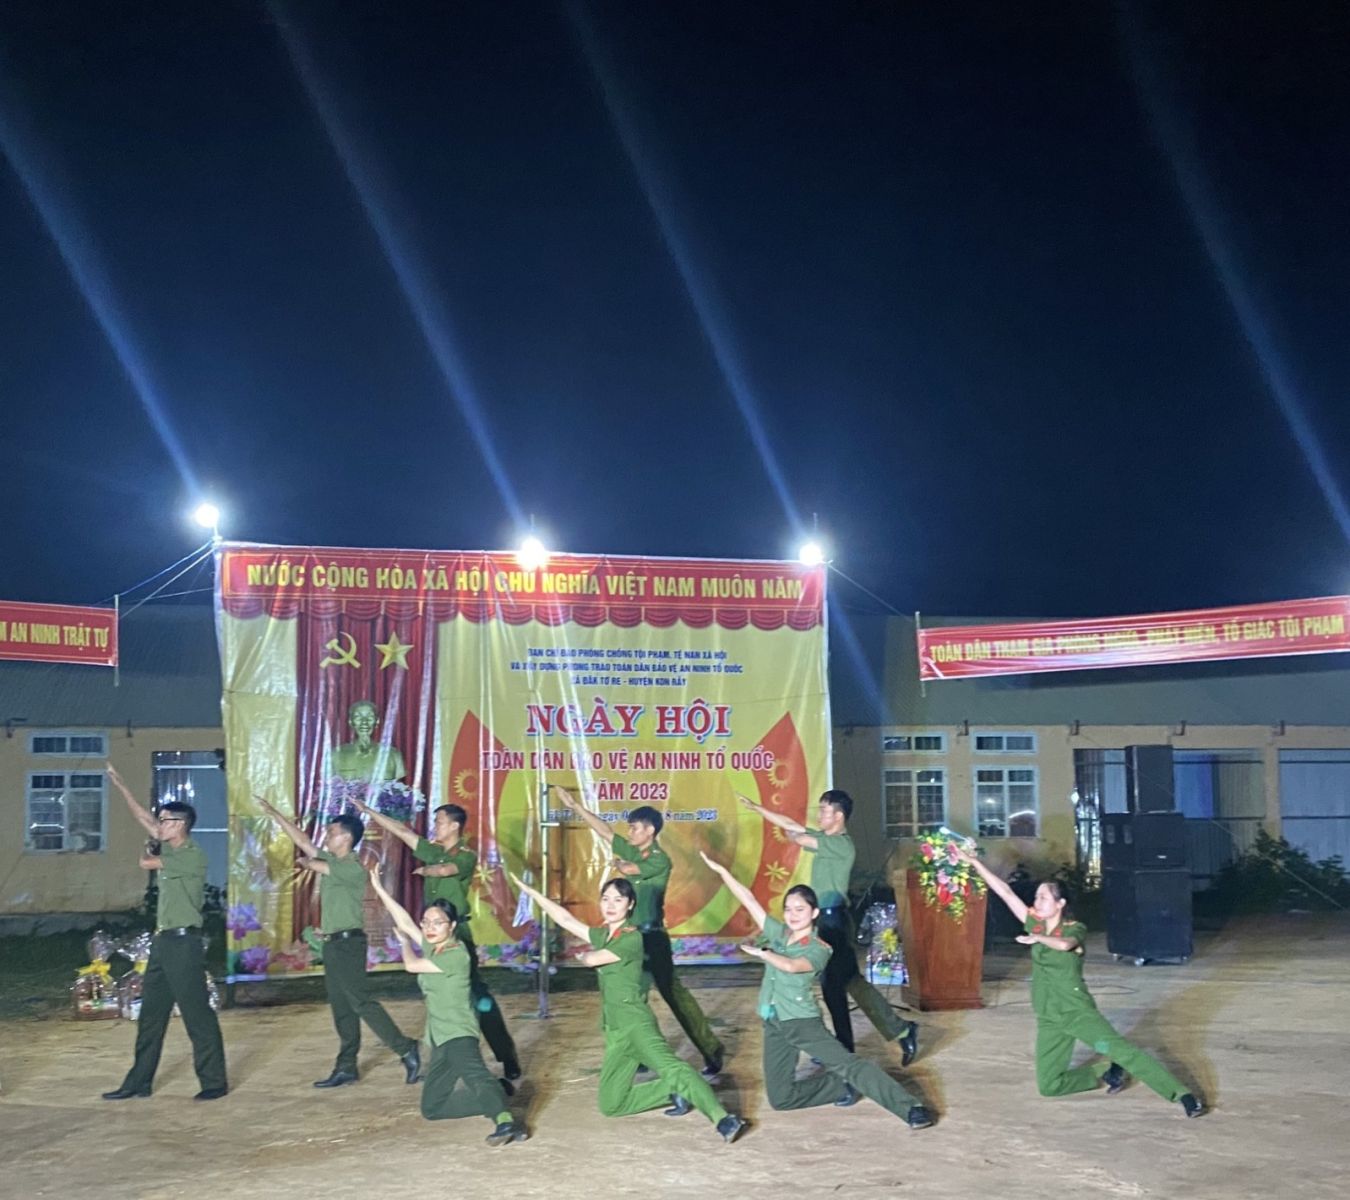 A group of people in green uniforms performing a dance  Description automatically generated